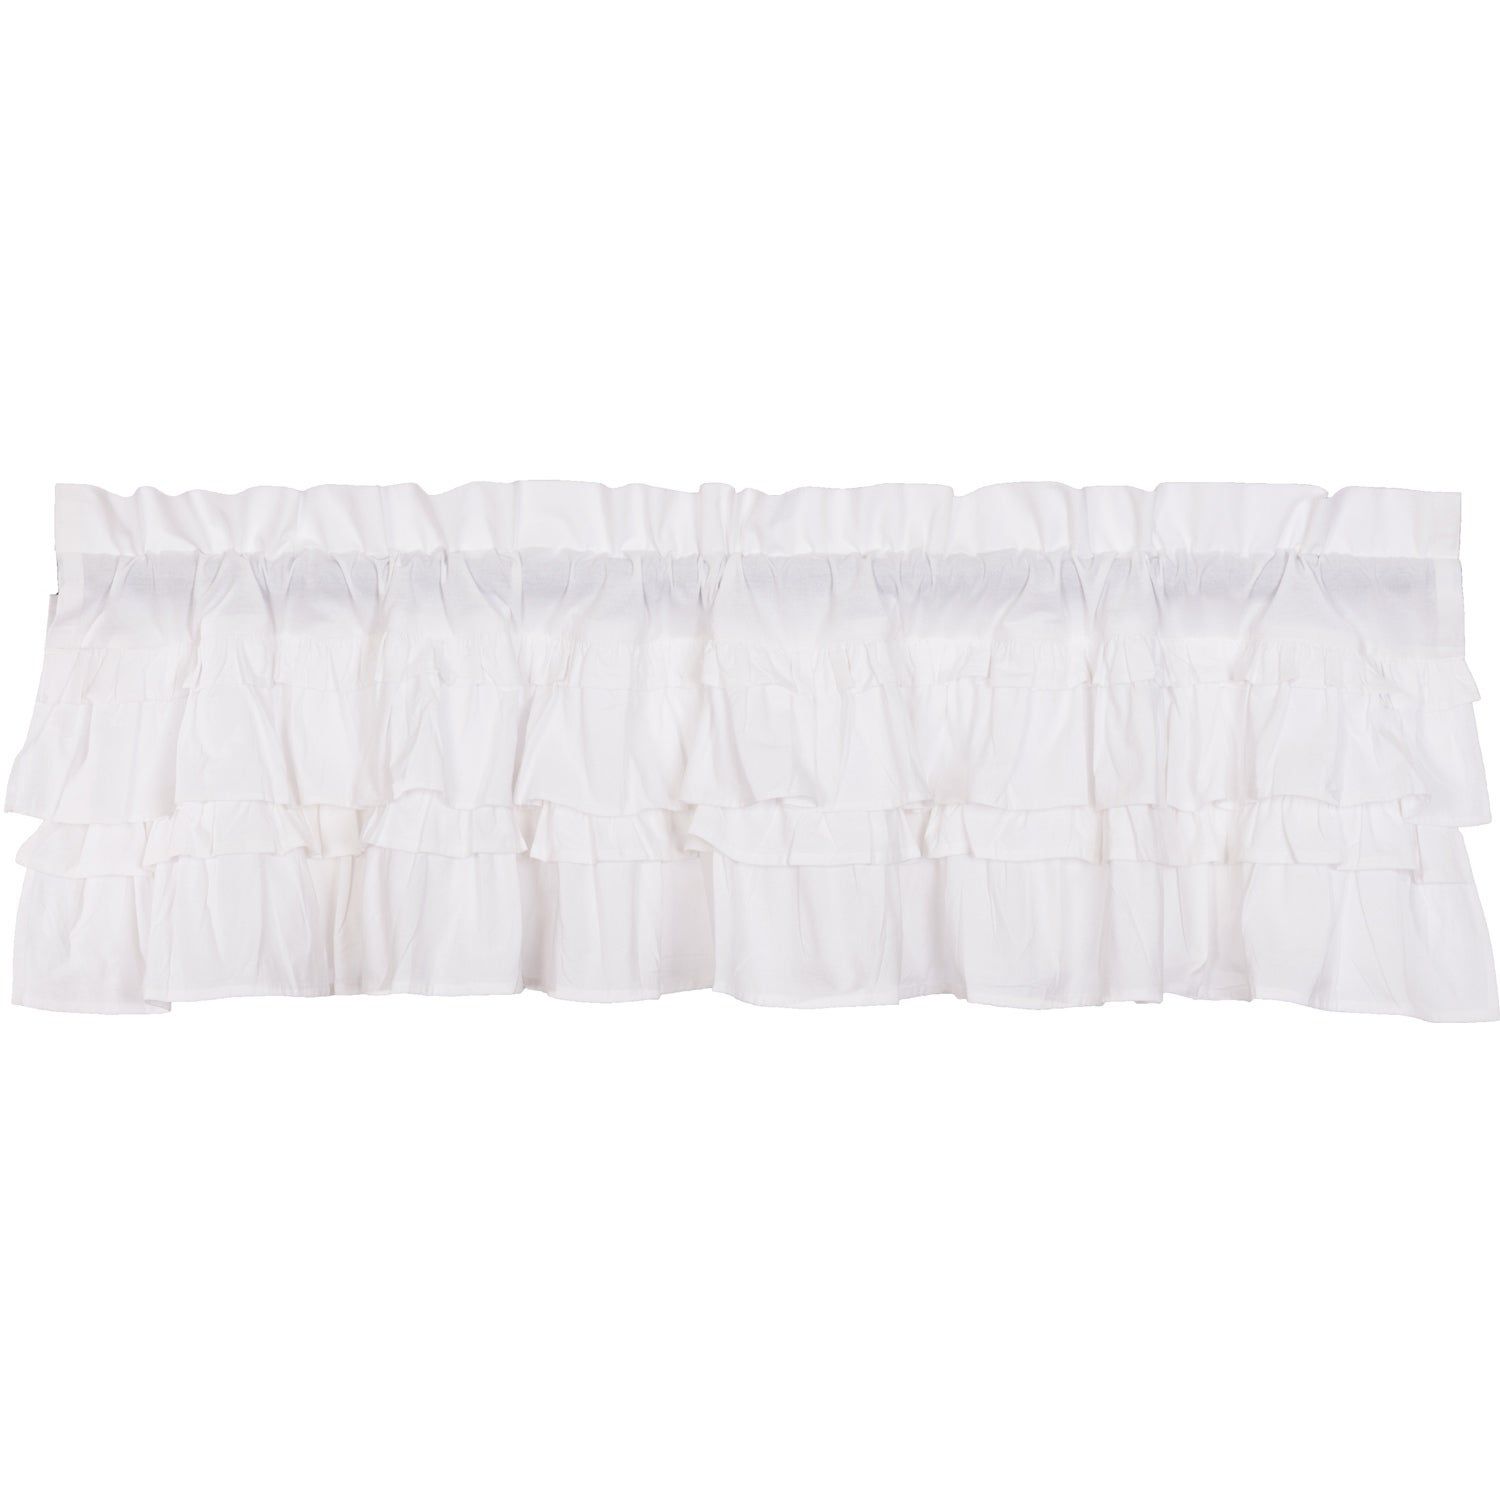 Farmhouse Kitchen Curtains Vhc Muslin Ruffled Valance Rod Pocket Cotton  Solid Color Muslin Throughout Rod Pocket Cotton Solid Color Ruched Ruffle Kitchen Curtains (View 7 of 20)